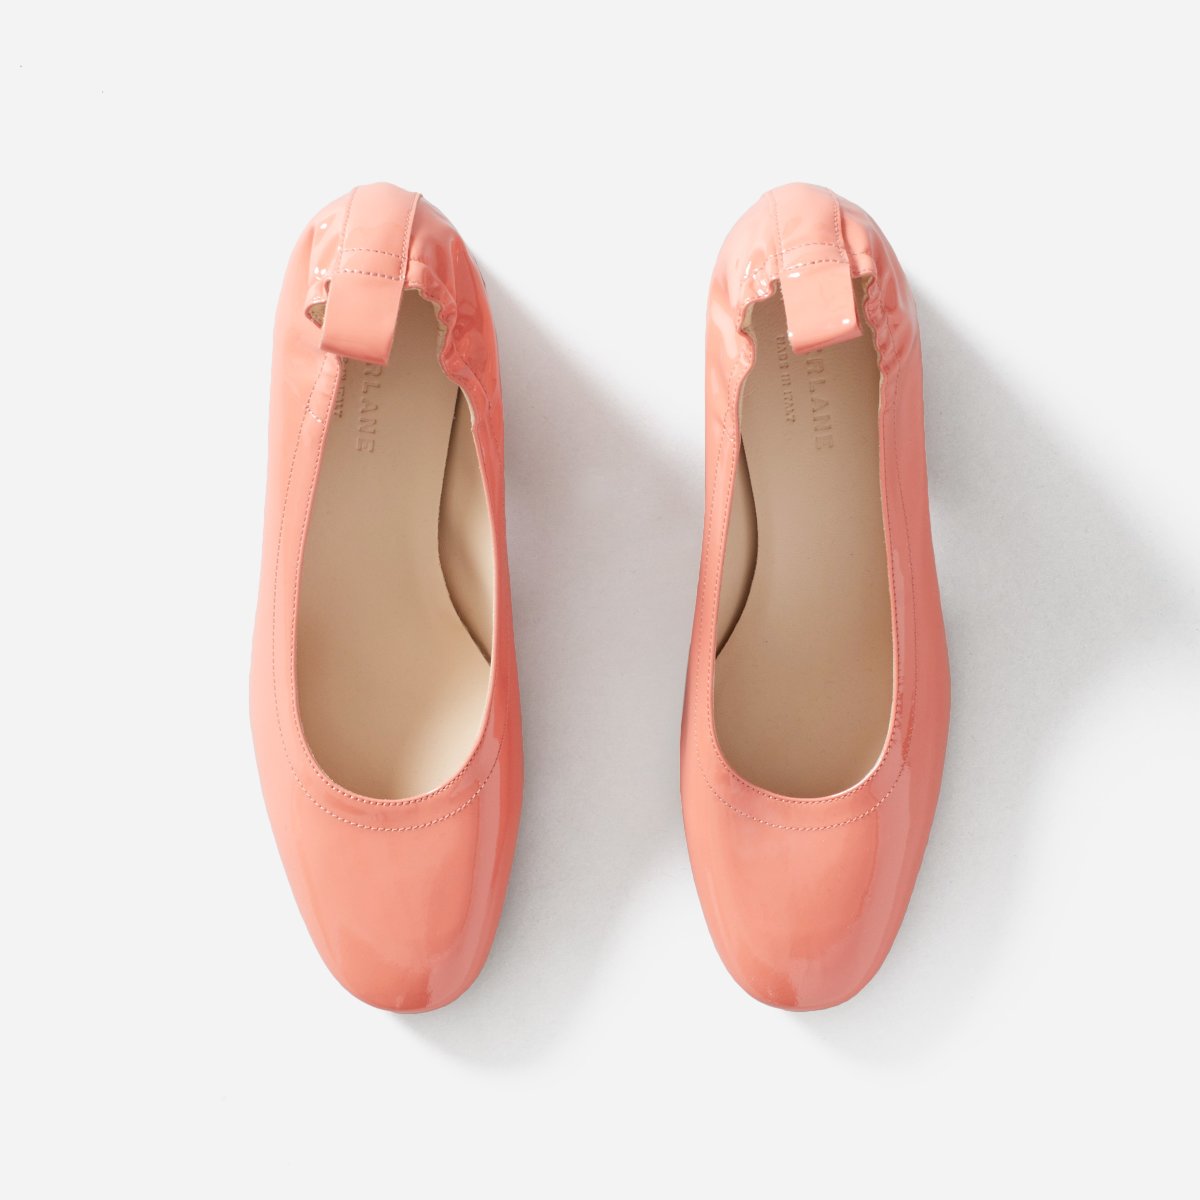 Everlane day heels in coral